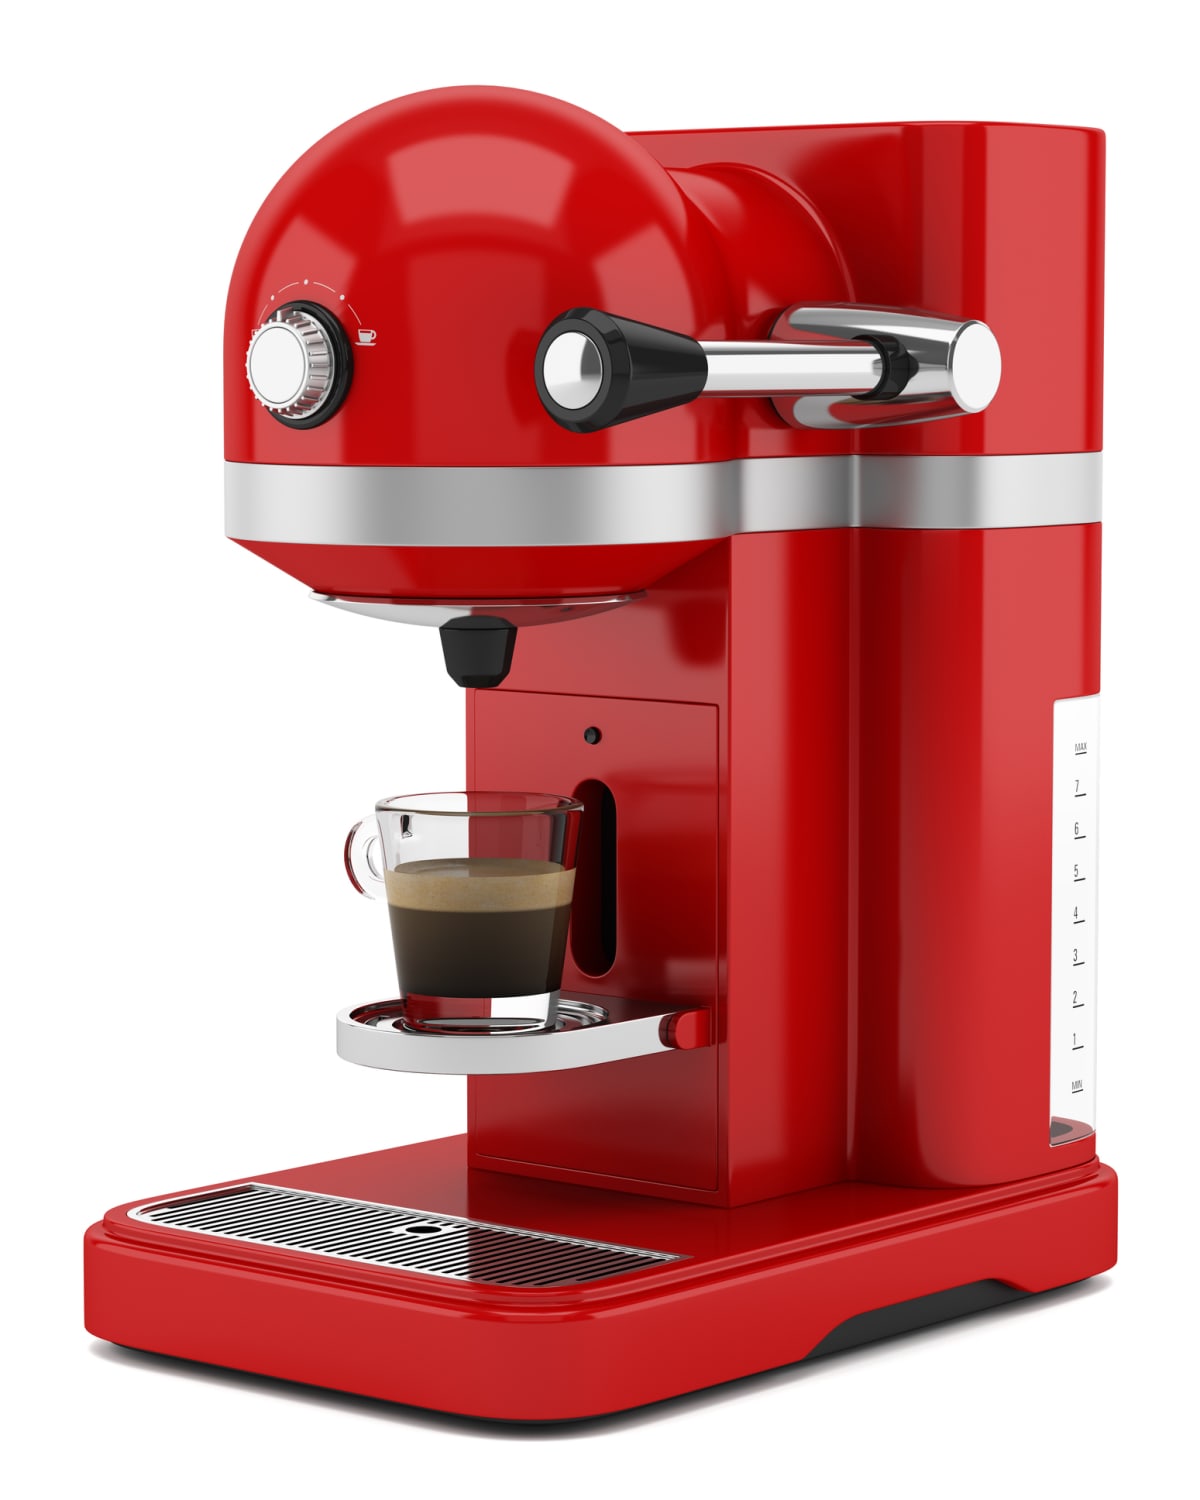 Red coffee machine isolated on white background